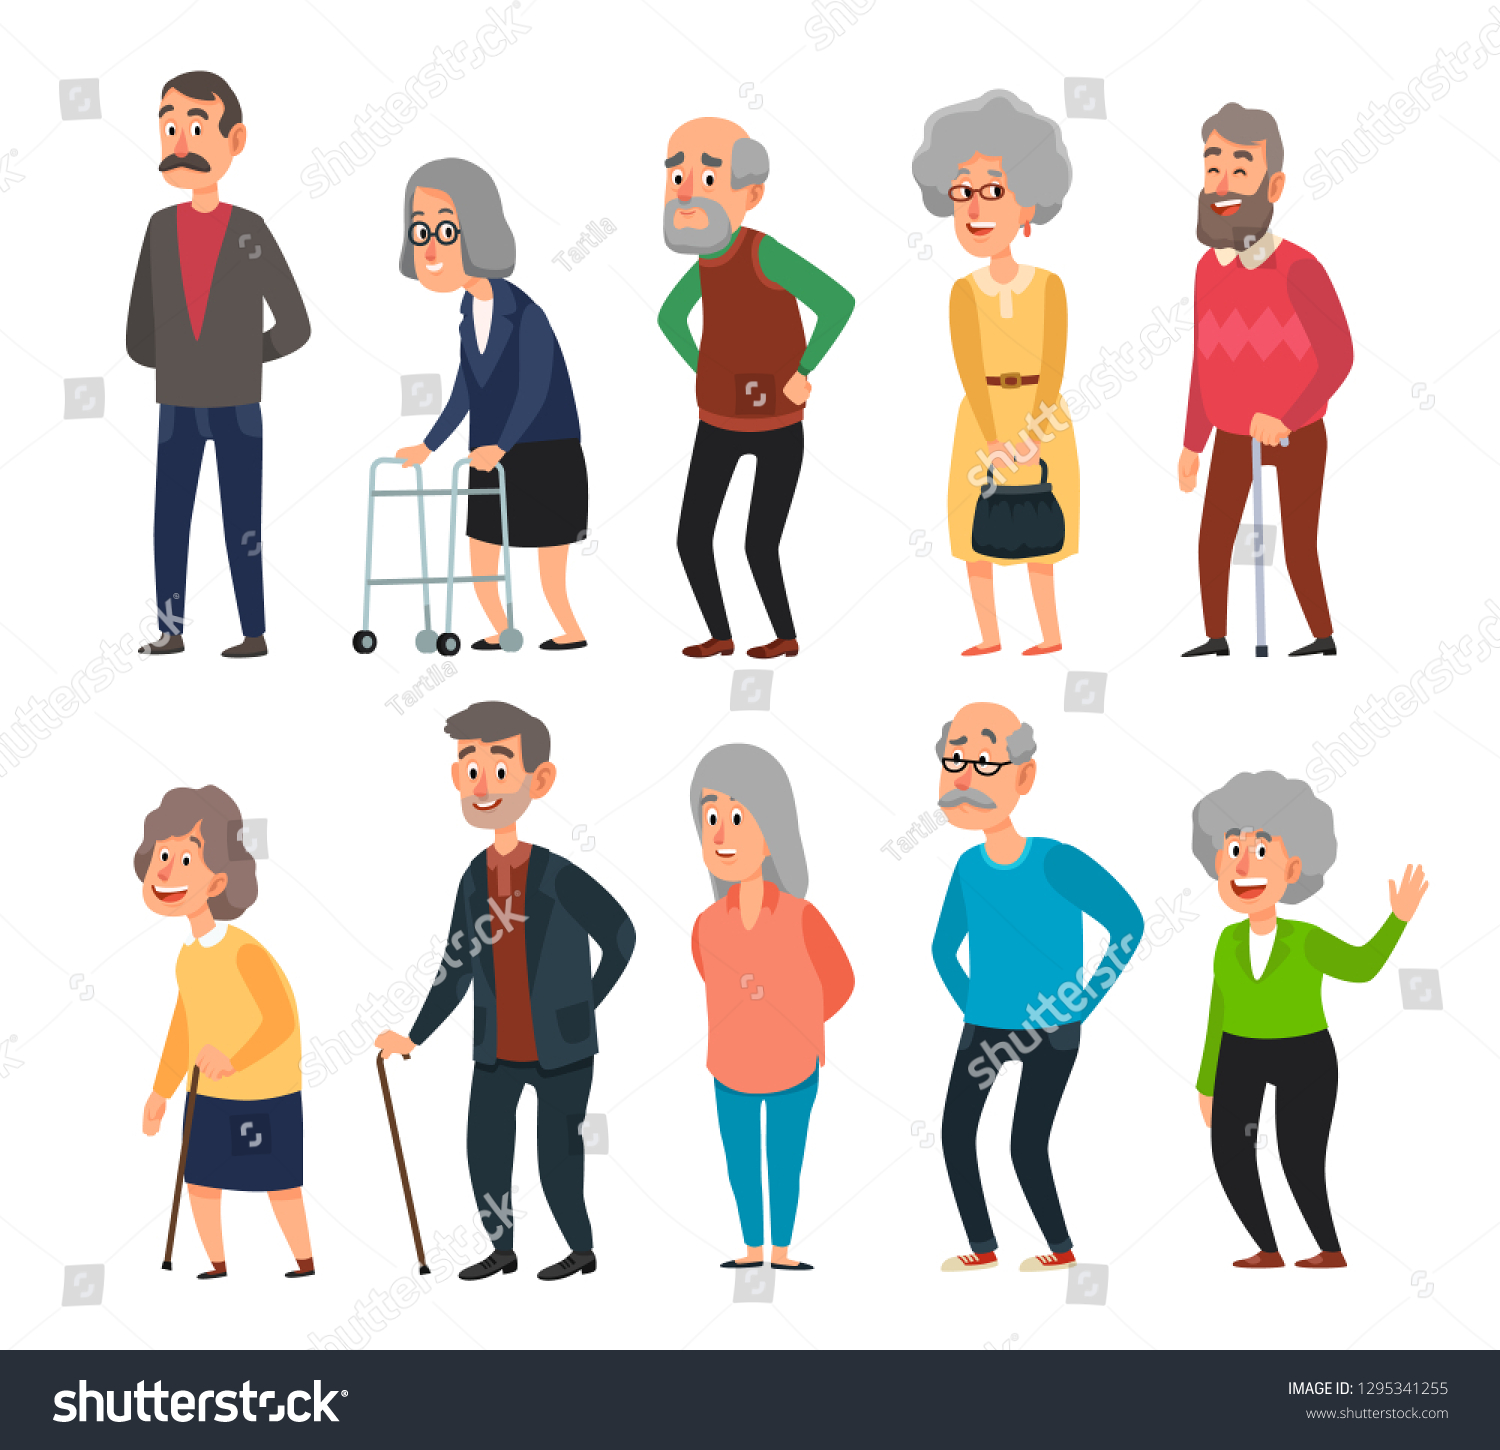 Old Cartoon Seniors Aged People Wrinkled Stock Vector (Royalty Free ...